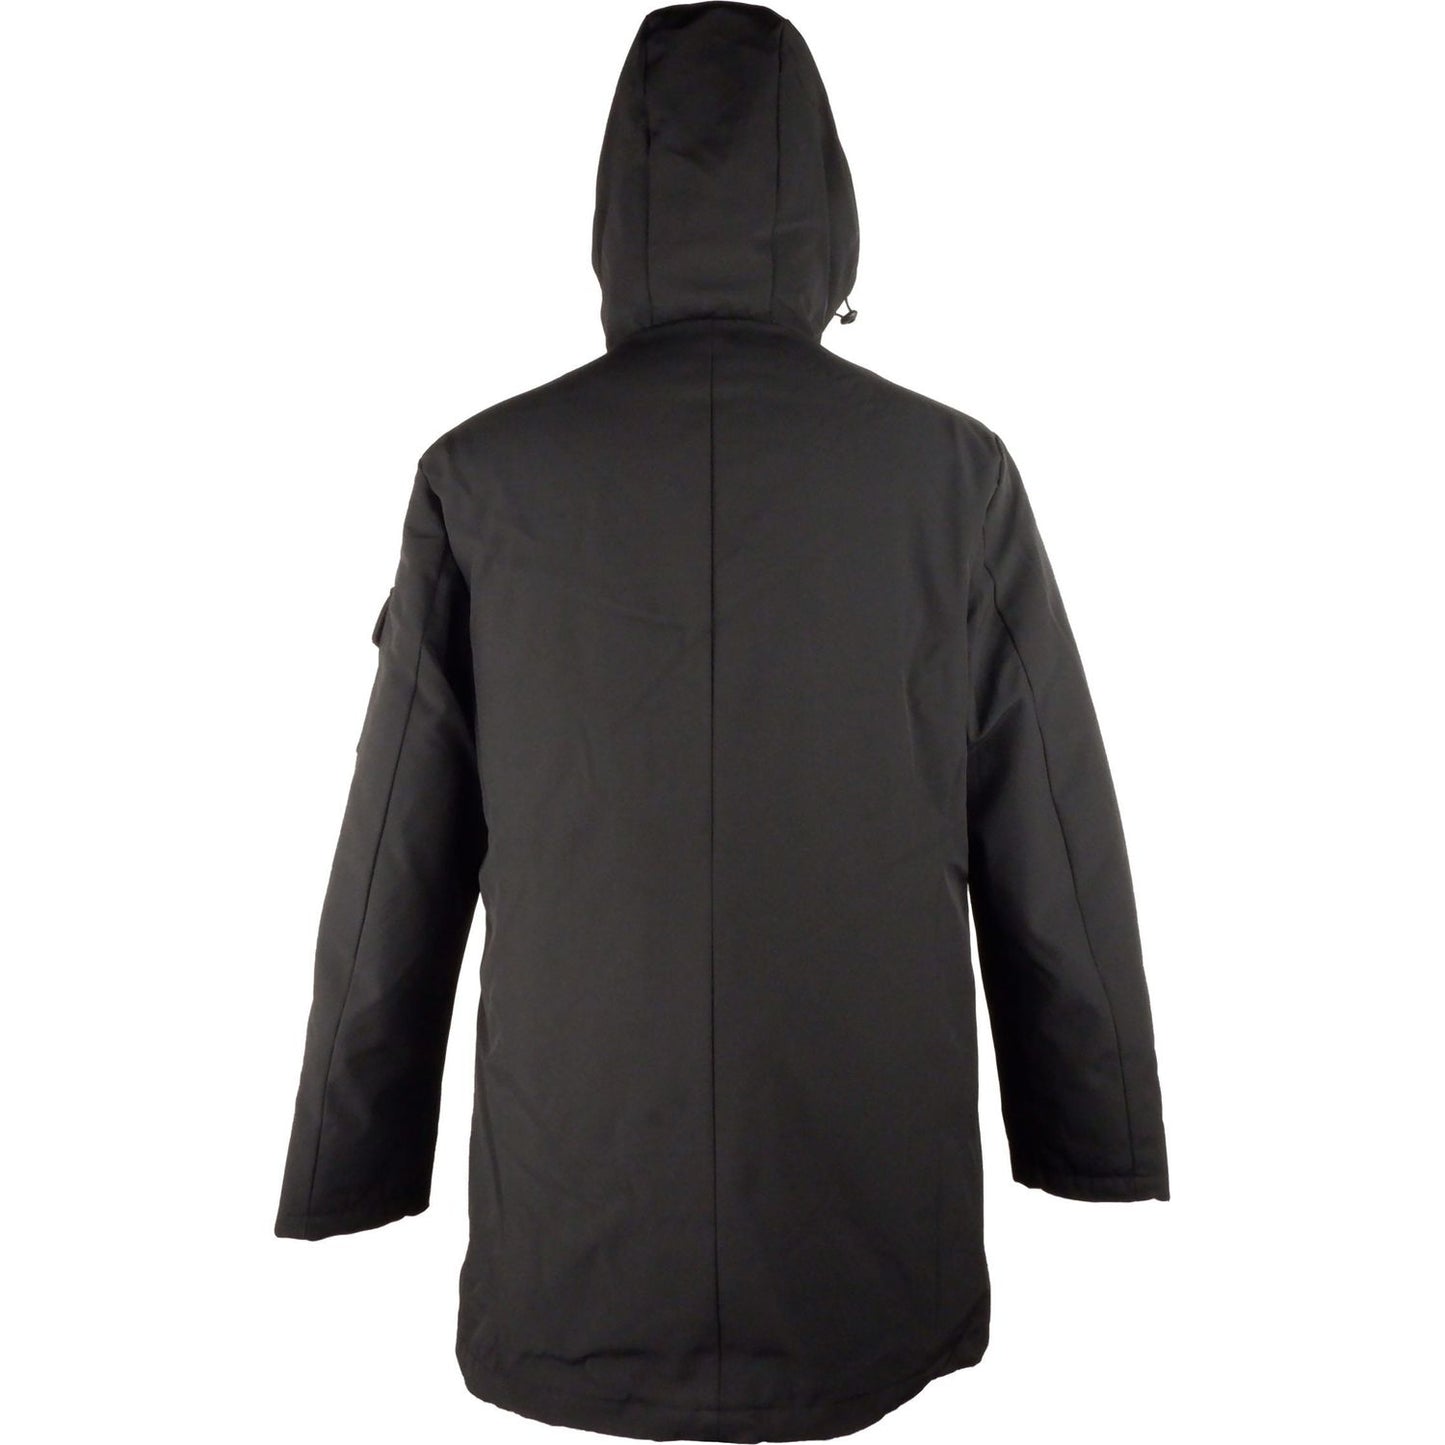 Refrigiwear Sleek Hooded Long Jacket with Zip and Button Closure black-polyester-jacket-8 stock_product_image_5263_475364411-38-scaled-1fe398e2-d41.jpg